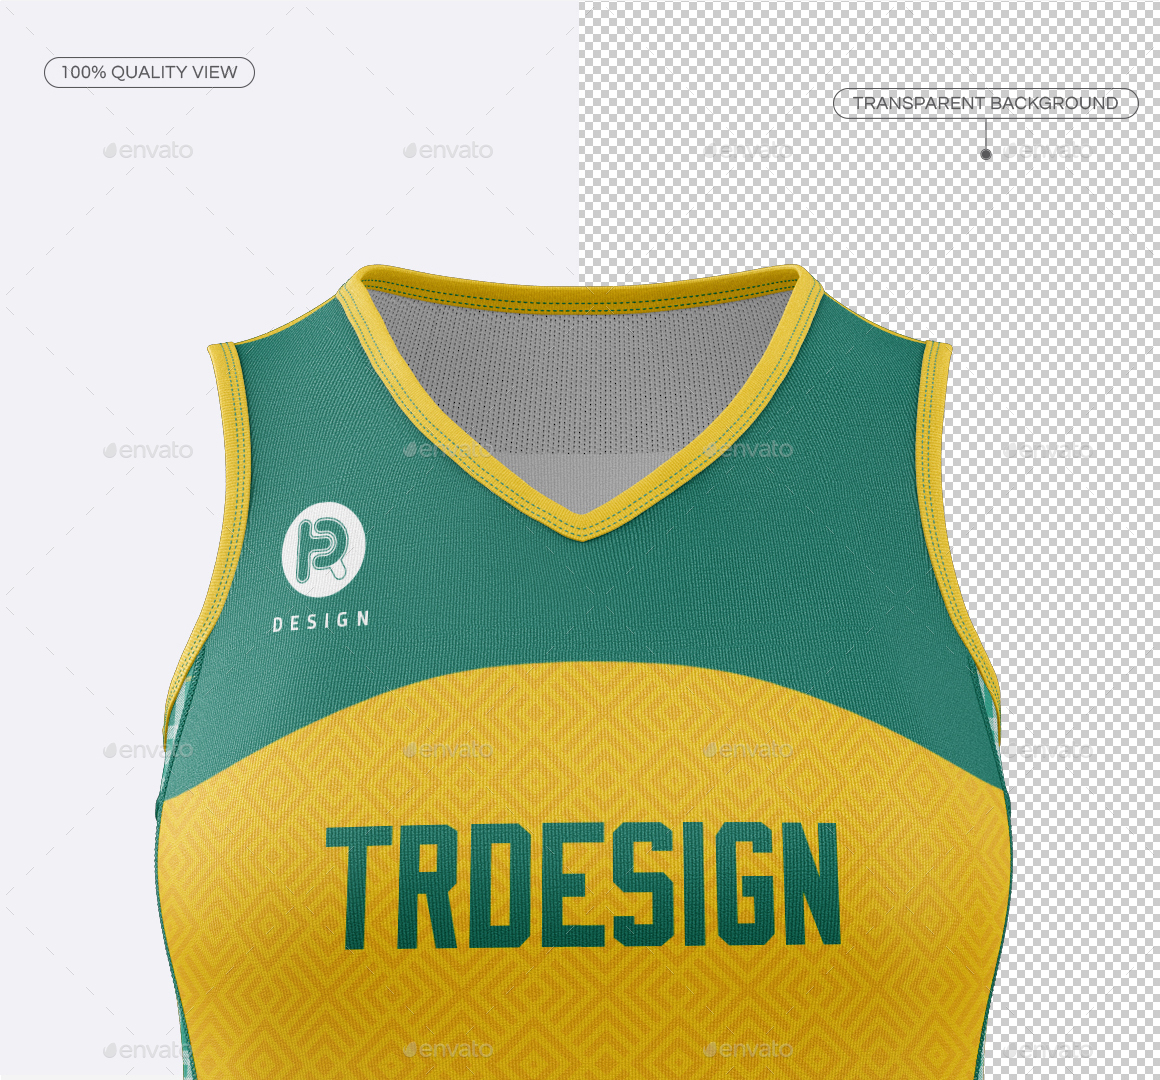 Download Women's Netball Dress Mockup V2 by TRDesignme | GraphicRiver